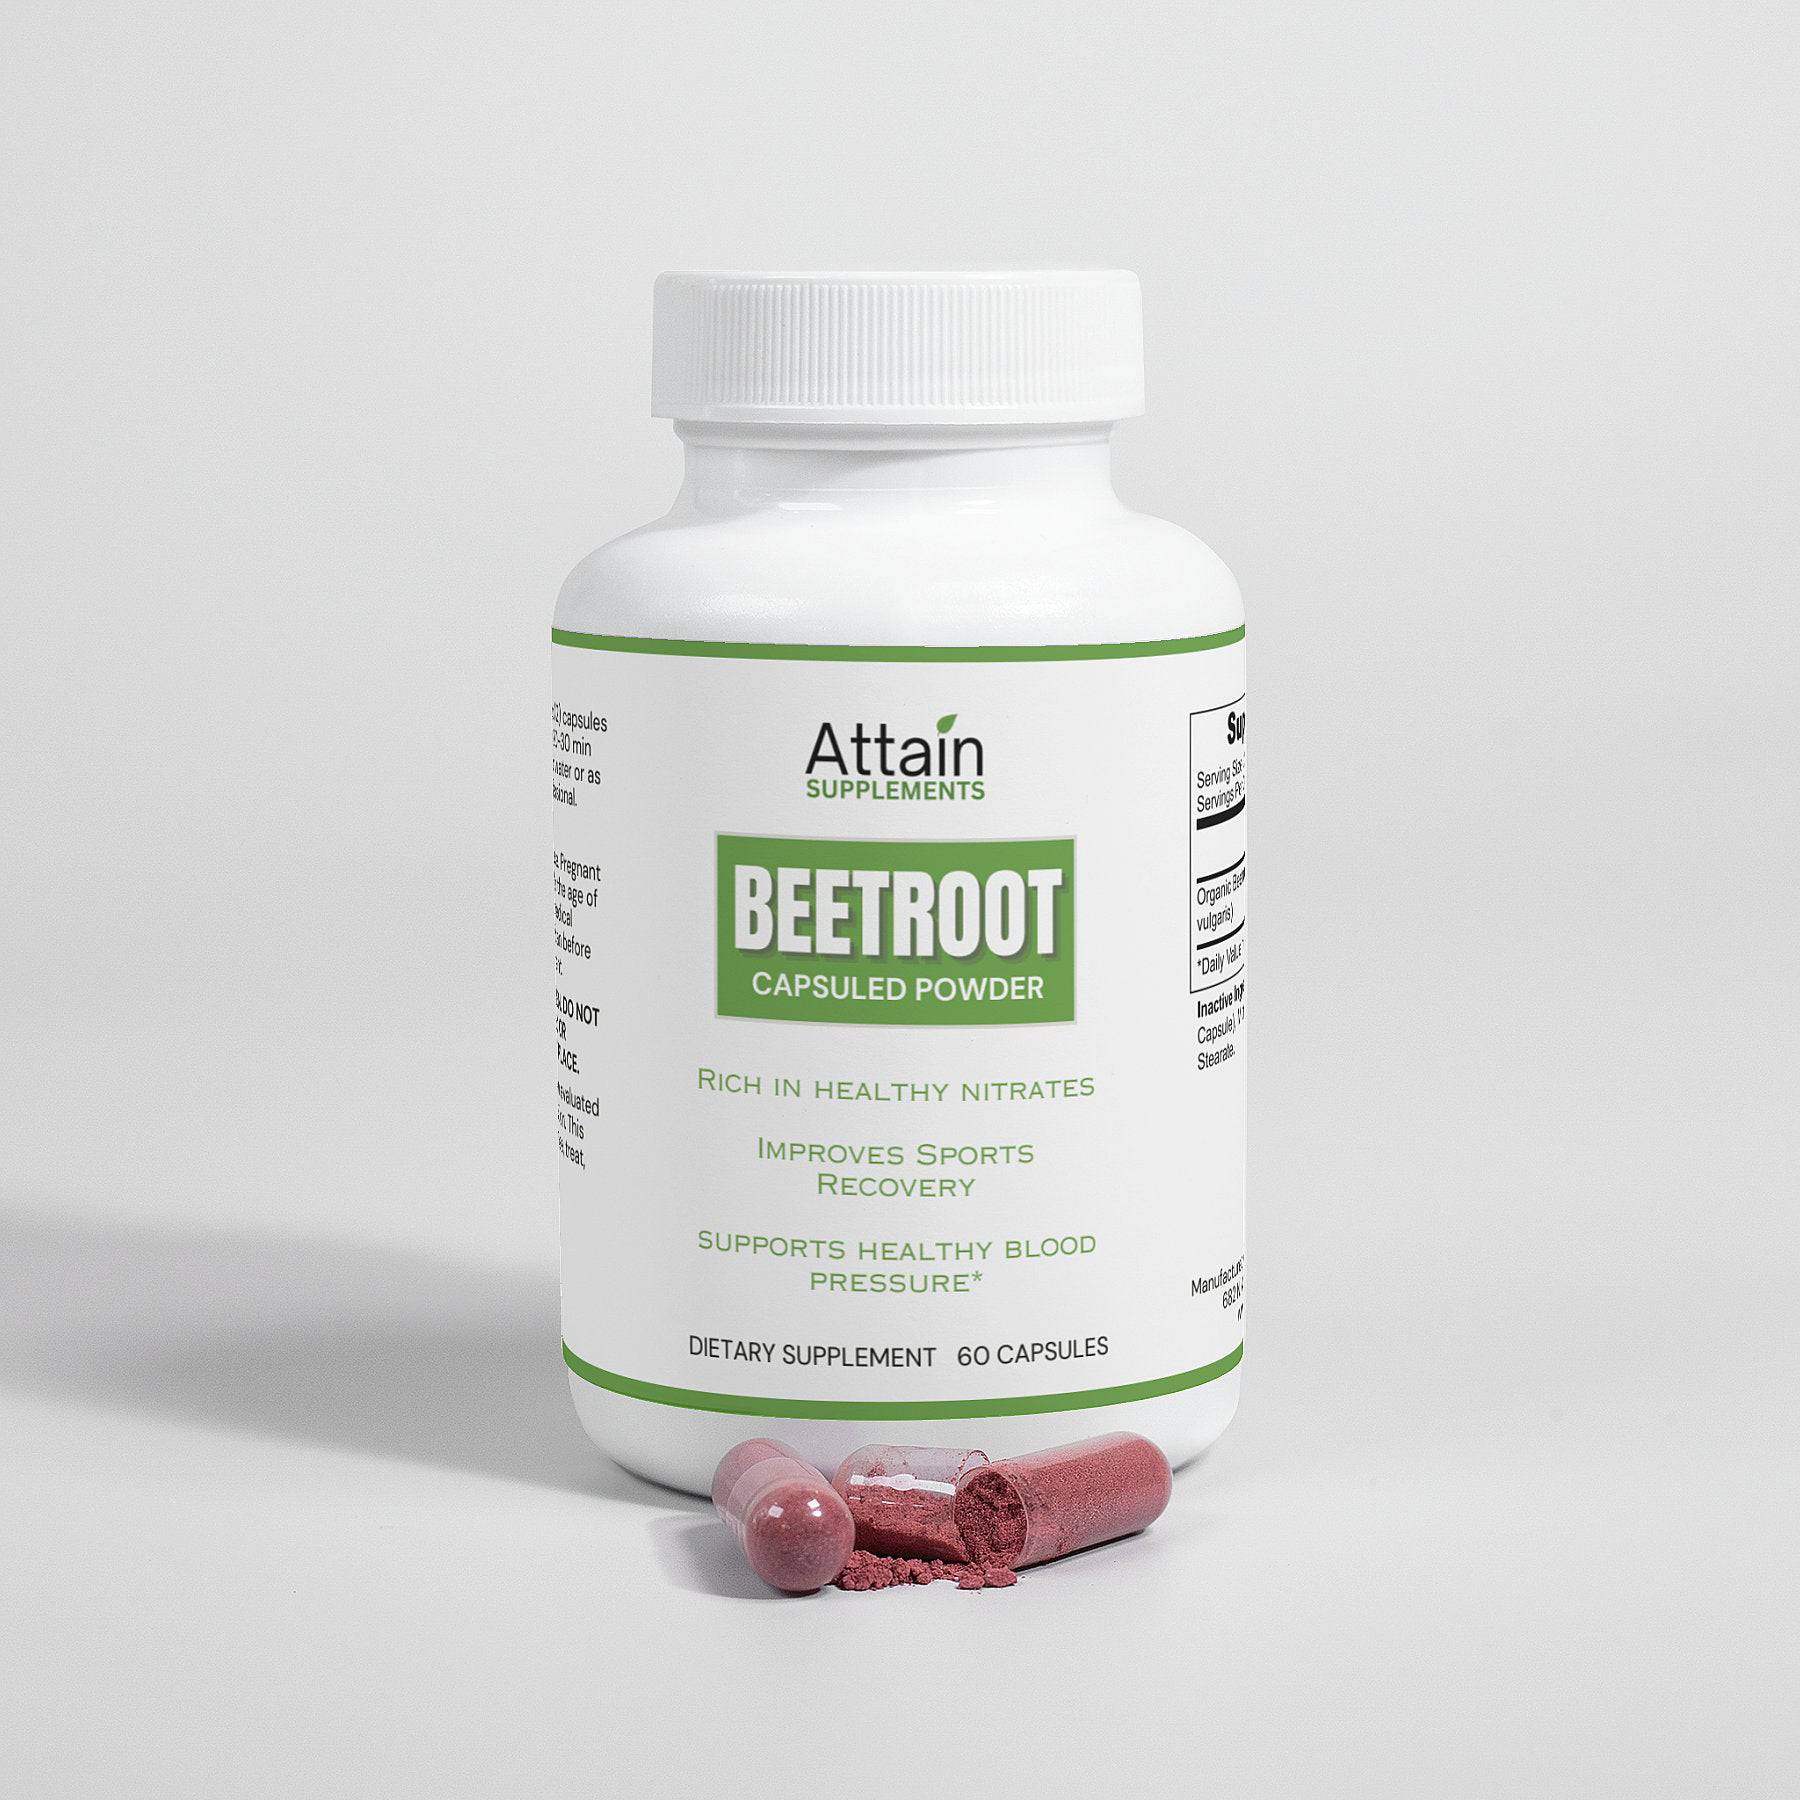 Beetroot Capsulated Powder in Bottle with capsule